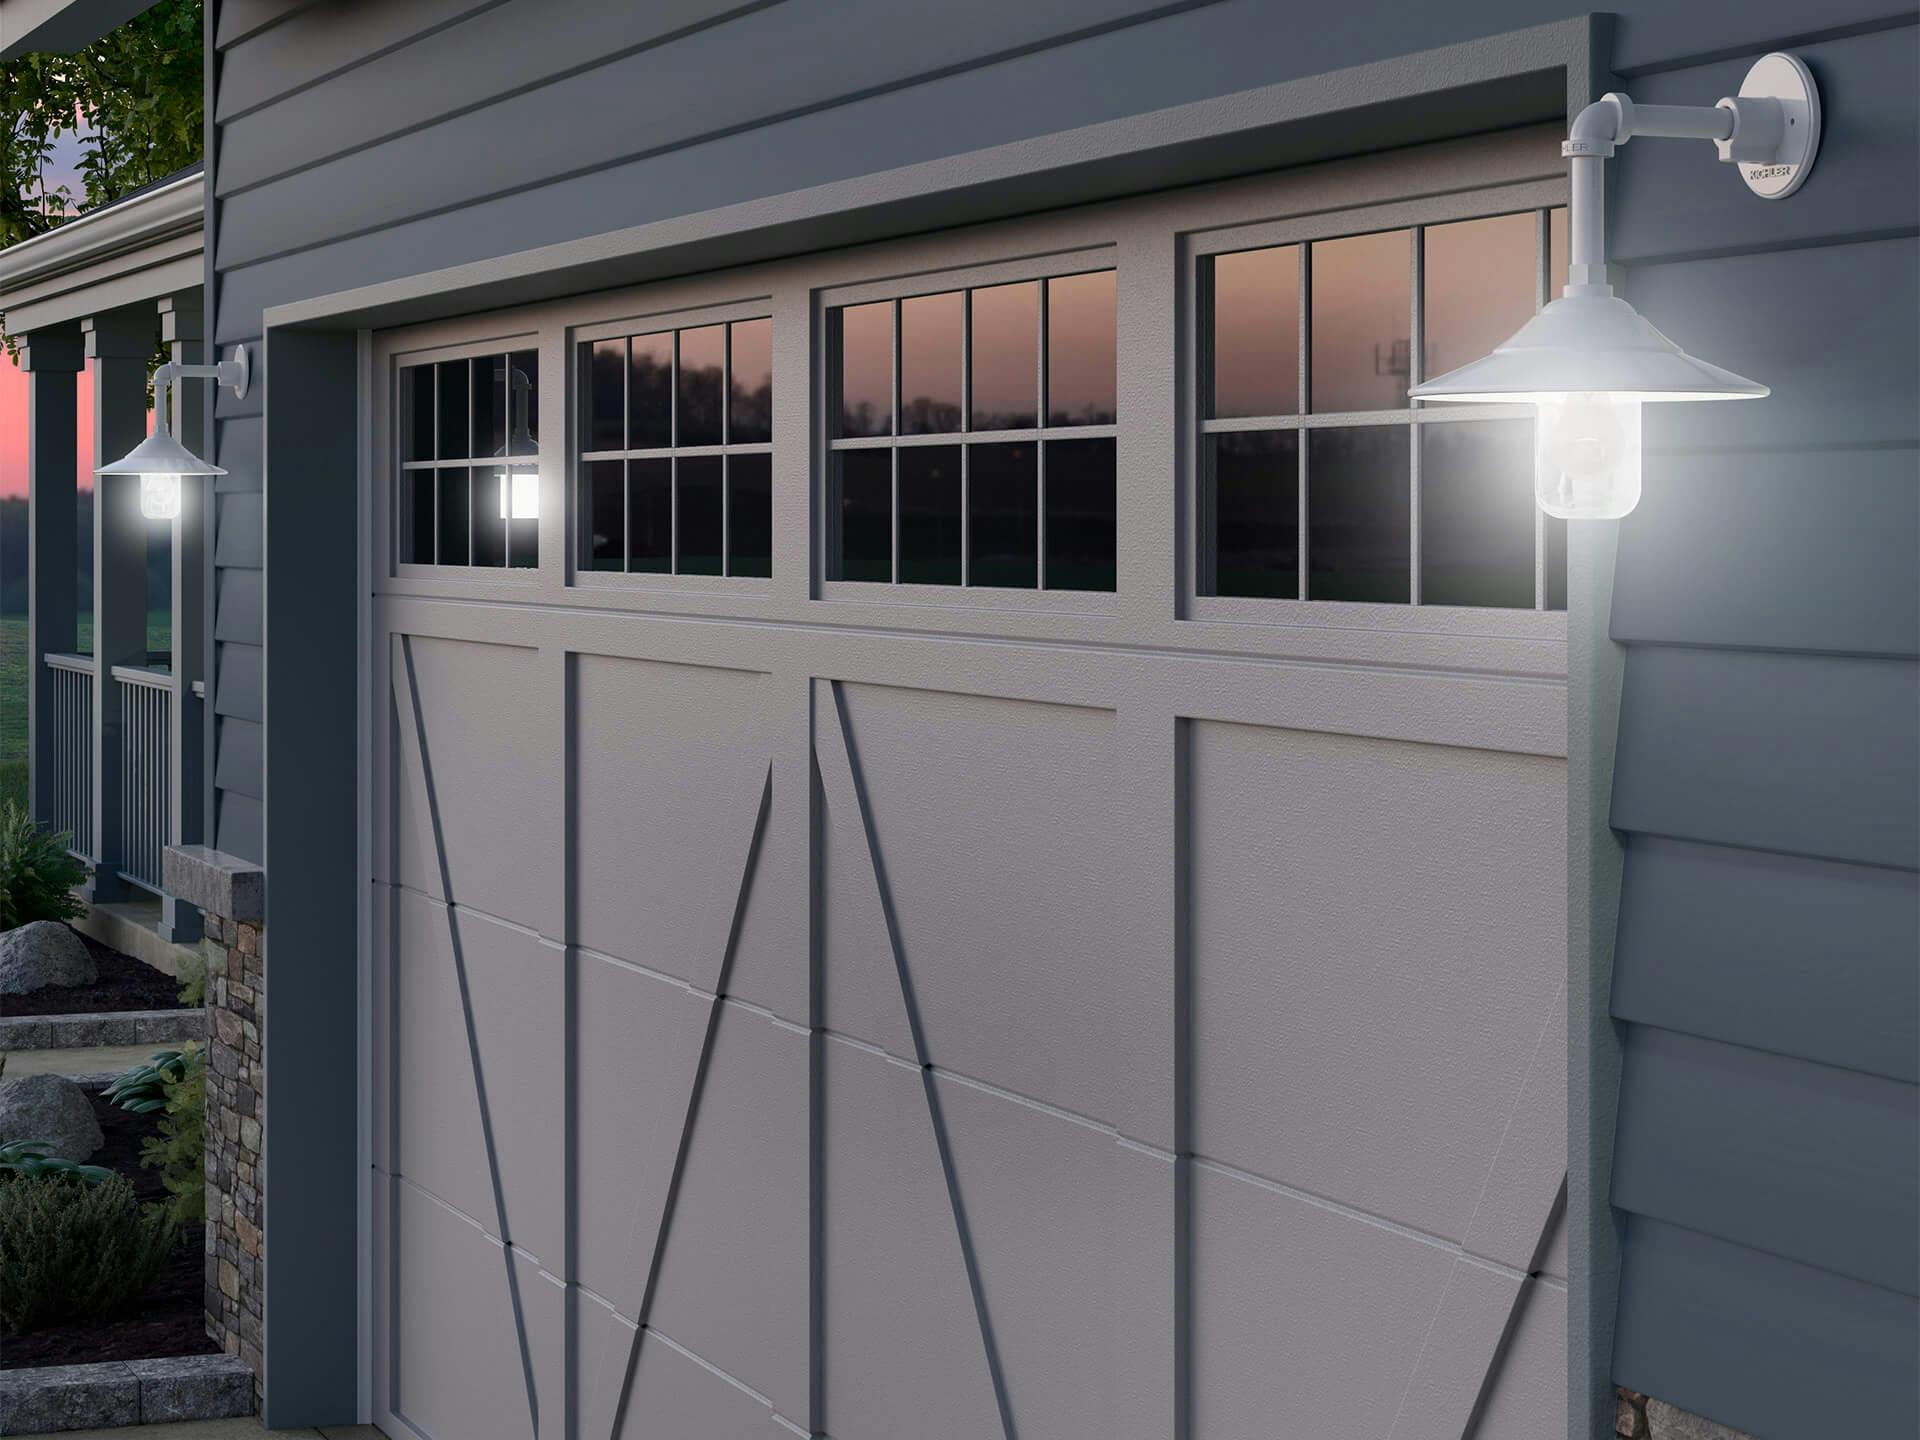 Exterior image of a garage at the front of a house with exterior wall lights lighting up the garage in the evening time 